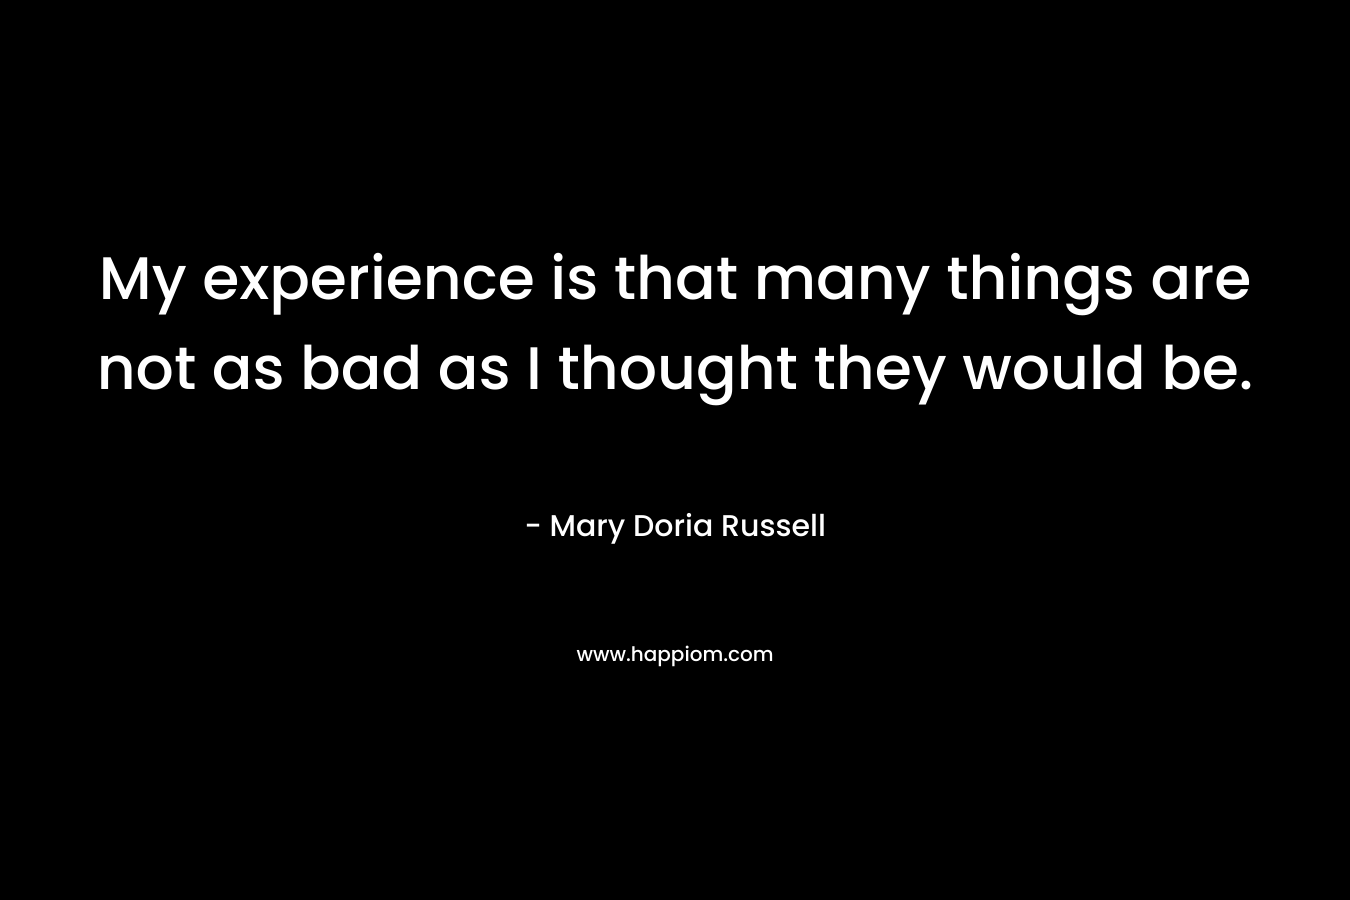 My experience is that many things are not as bad as I thought they would be. – Mary Doria Russell